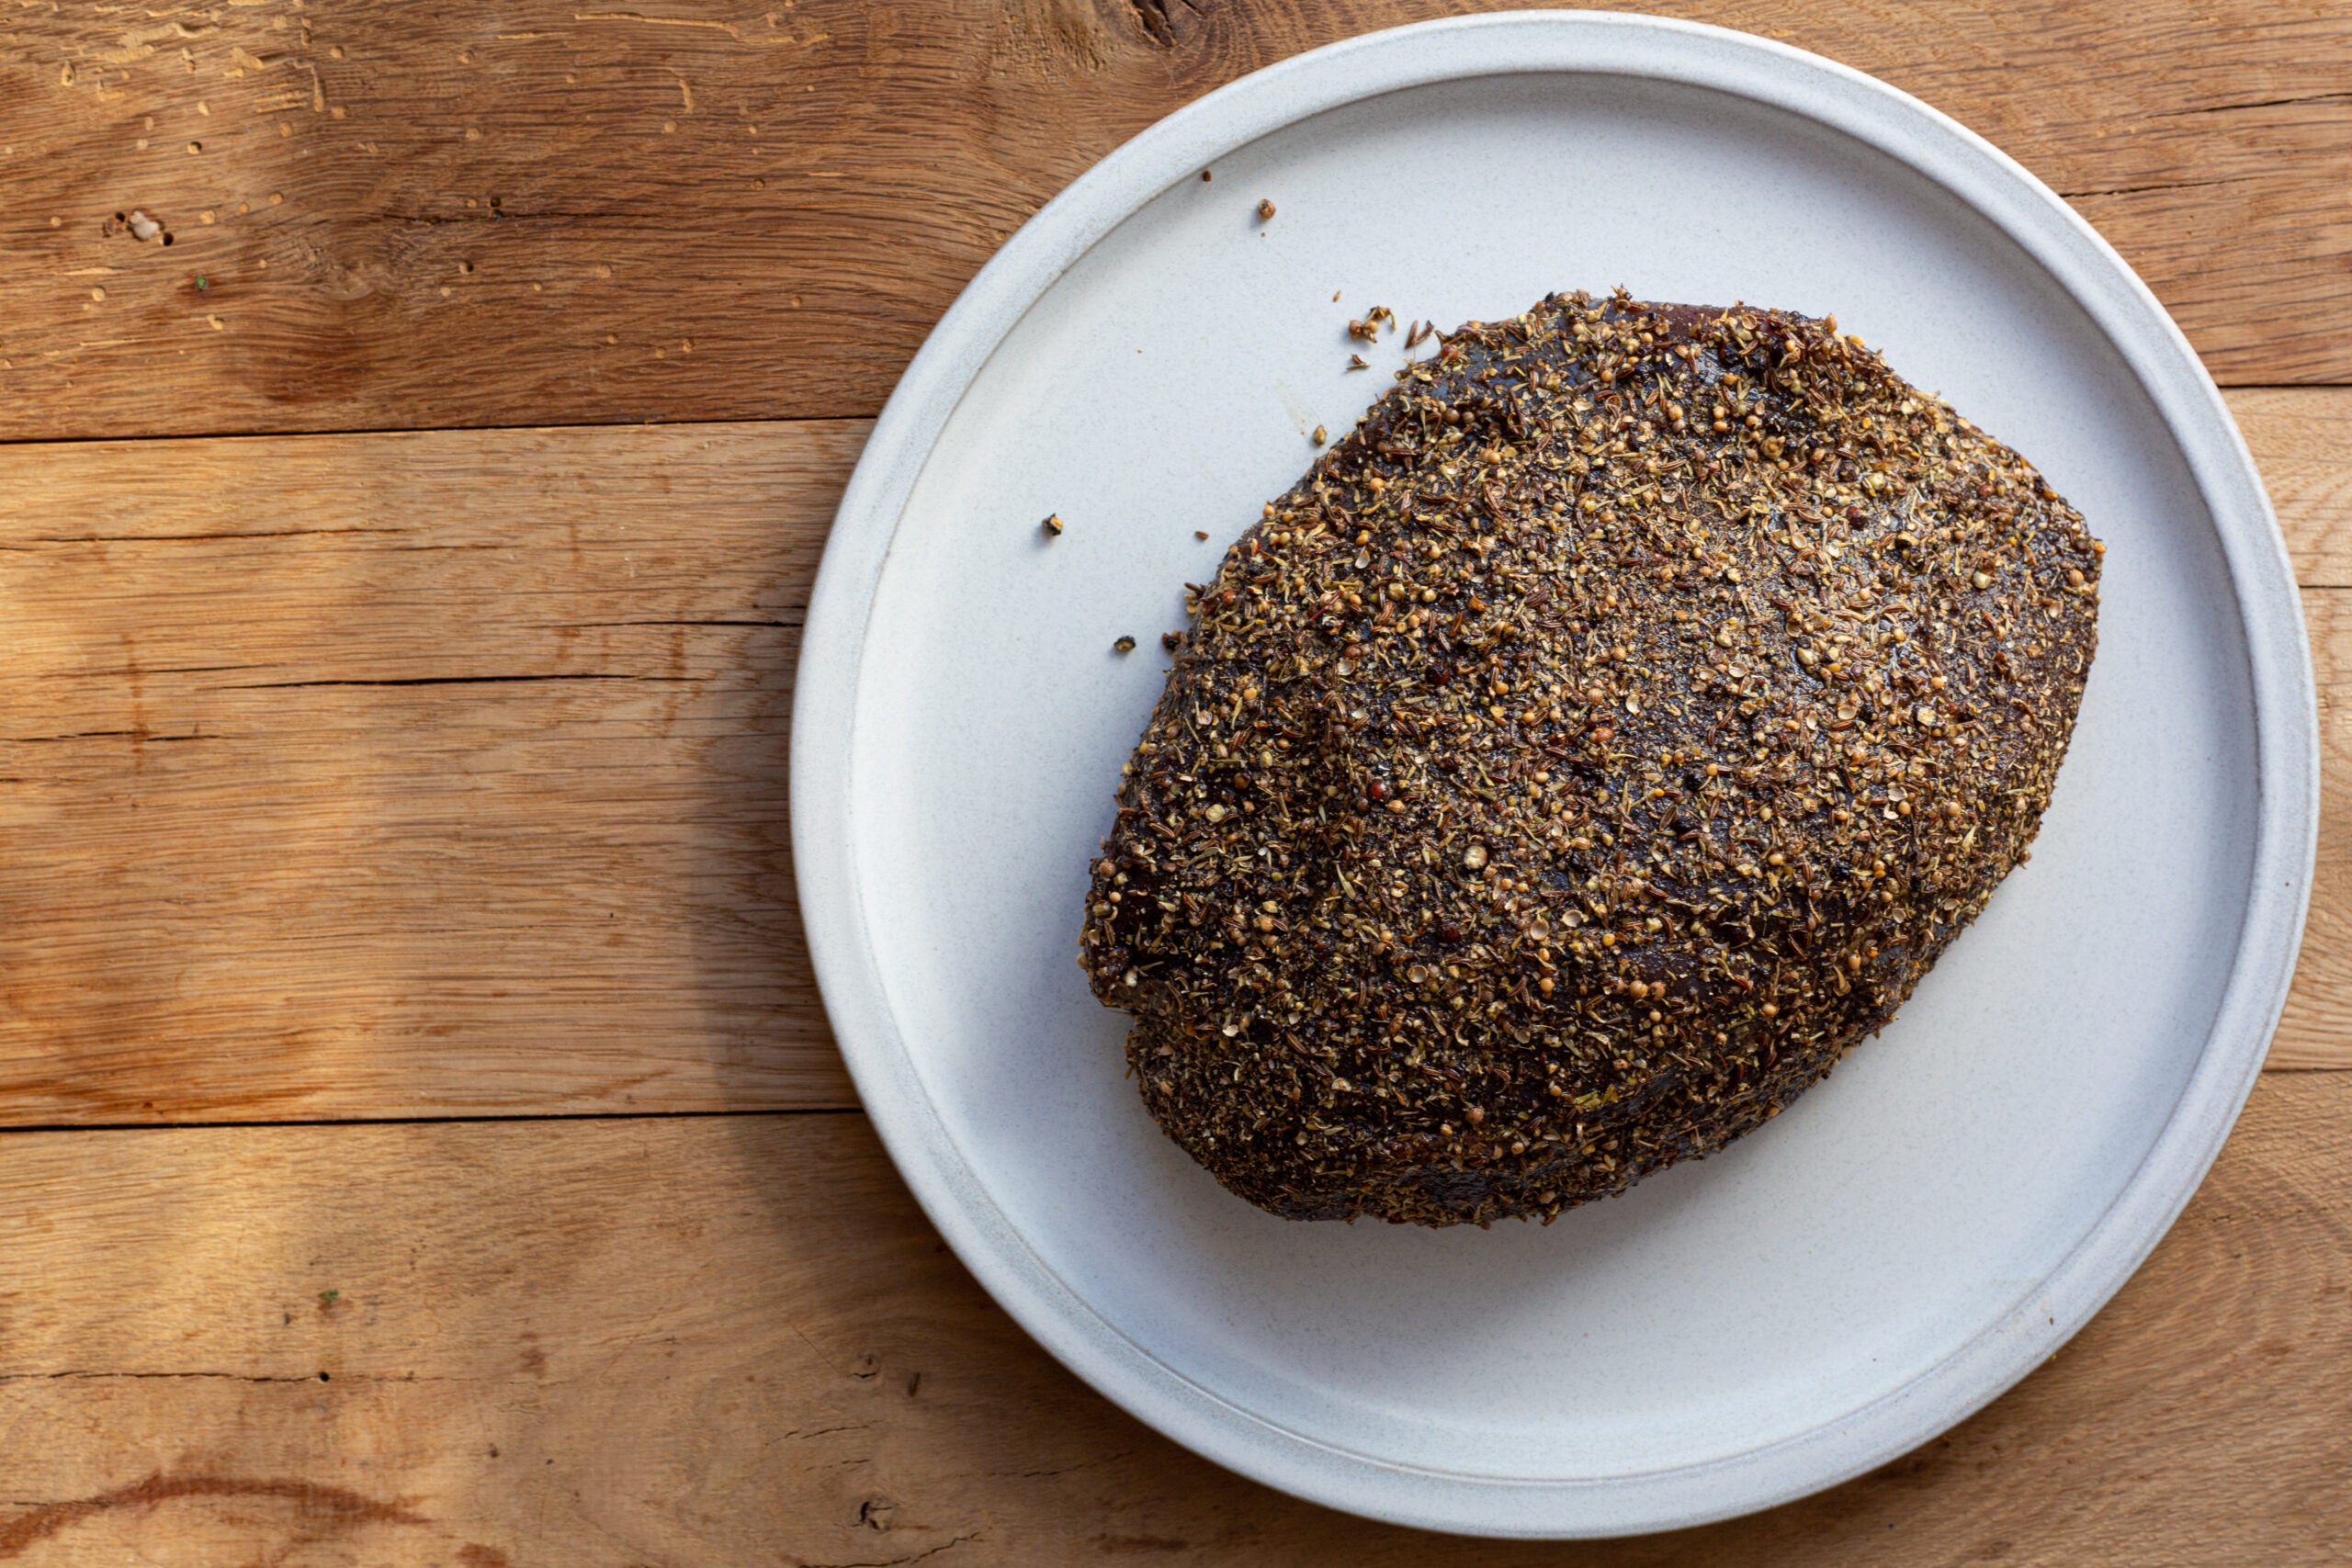 A venison roast covered in spices before it's made into venison pastrami.